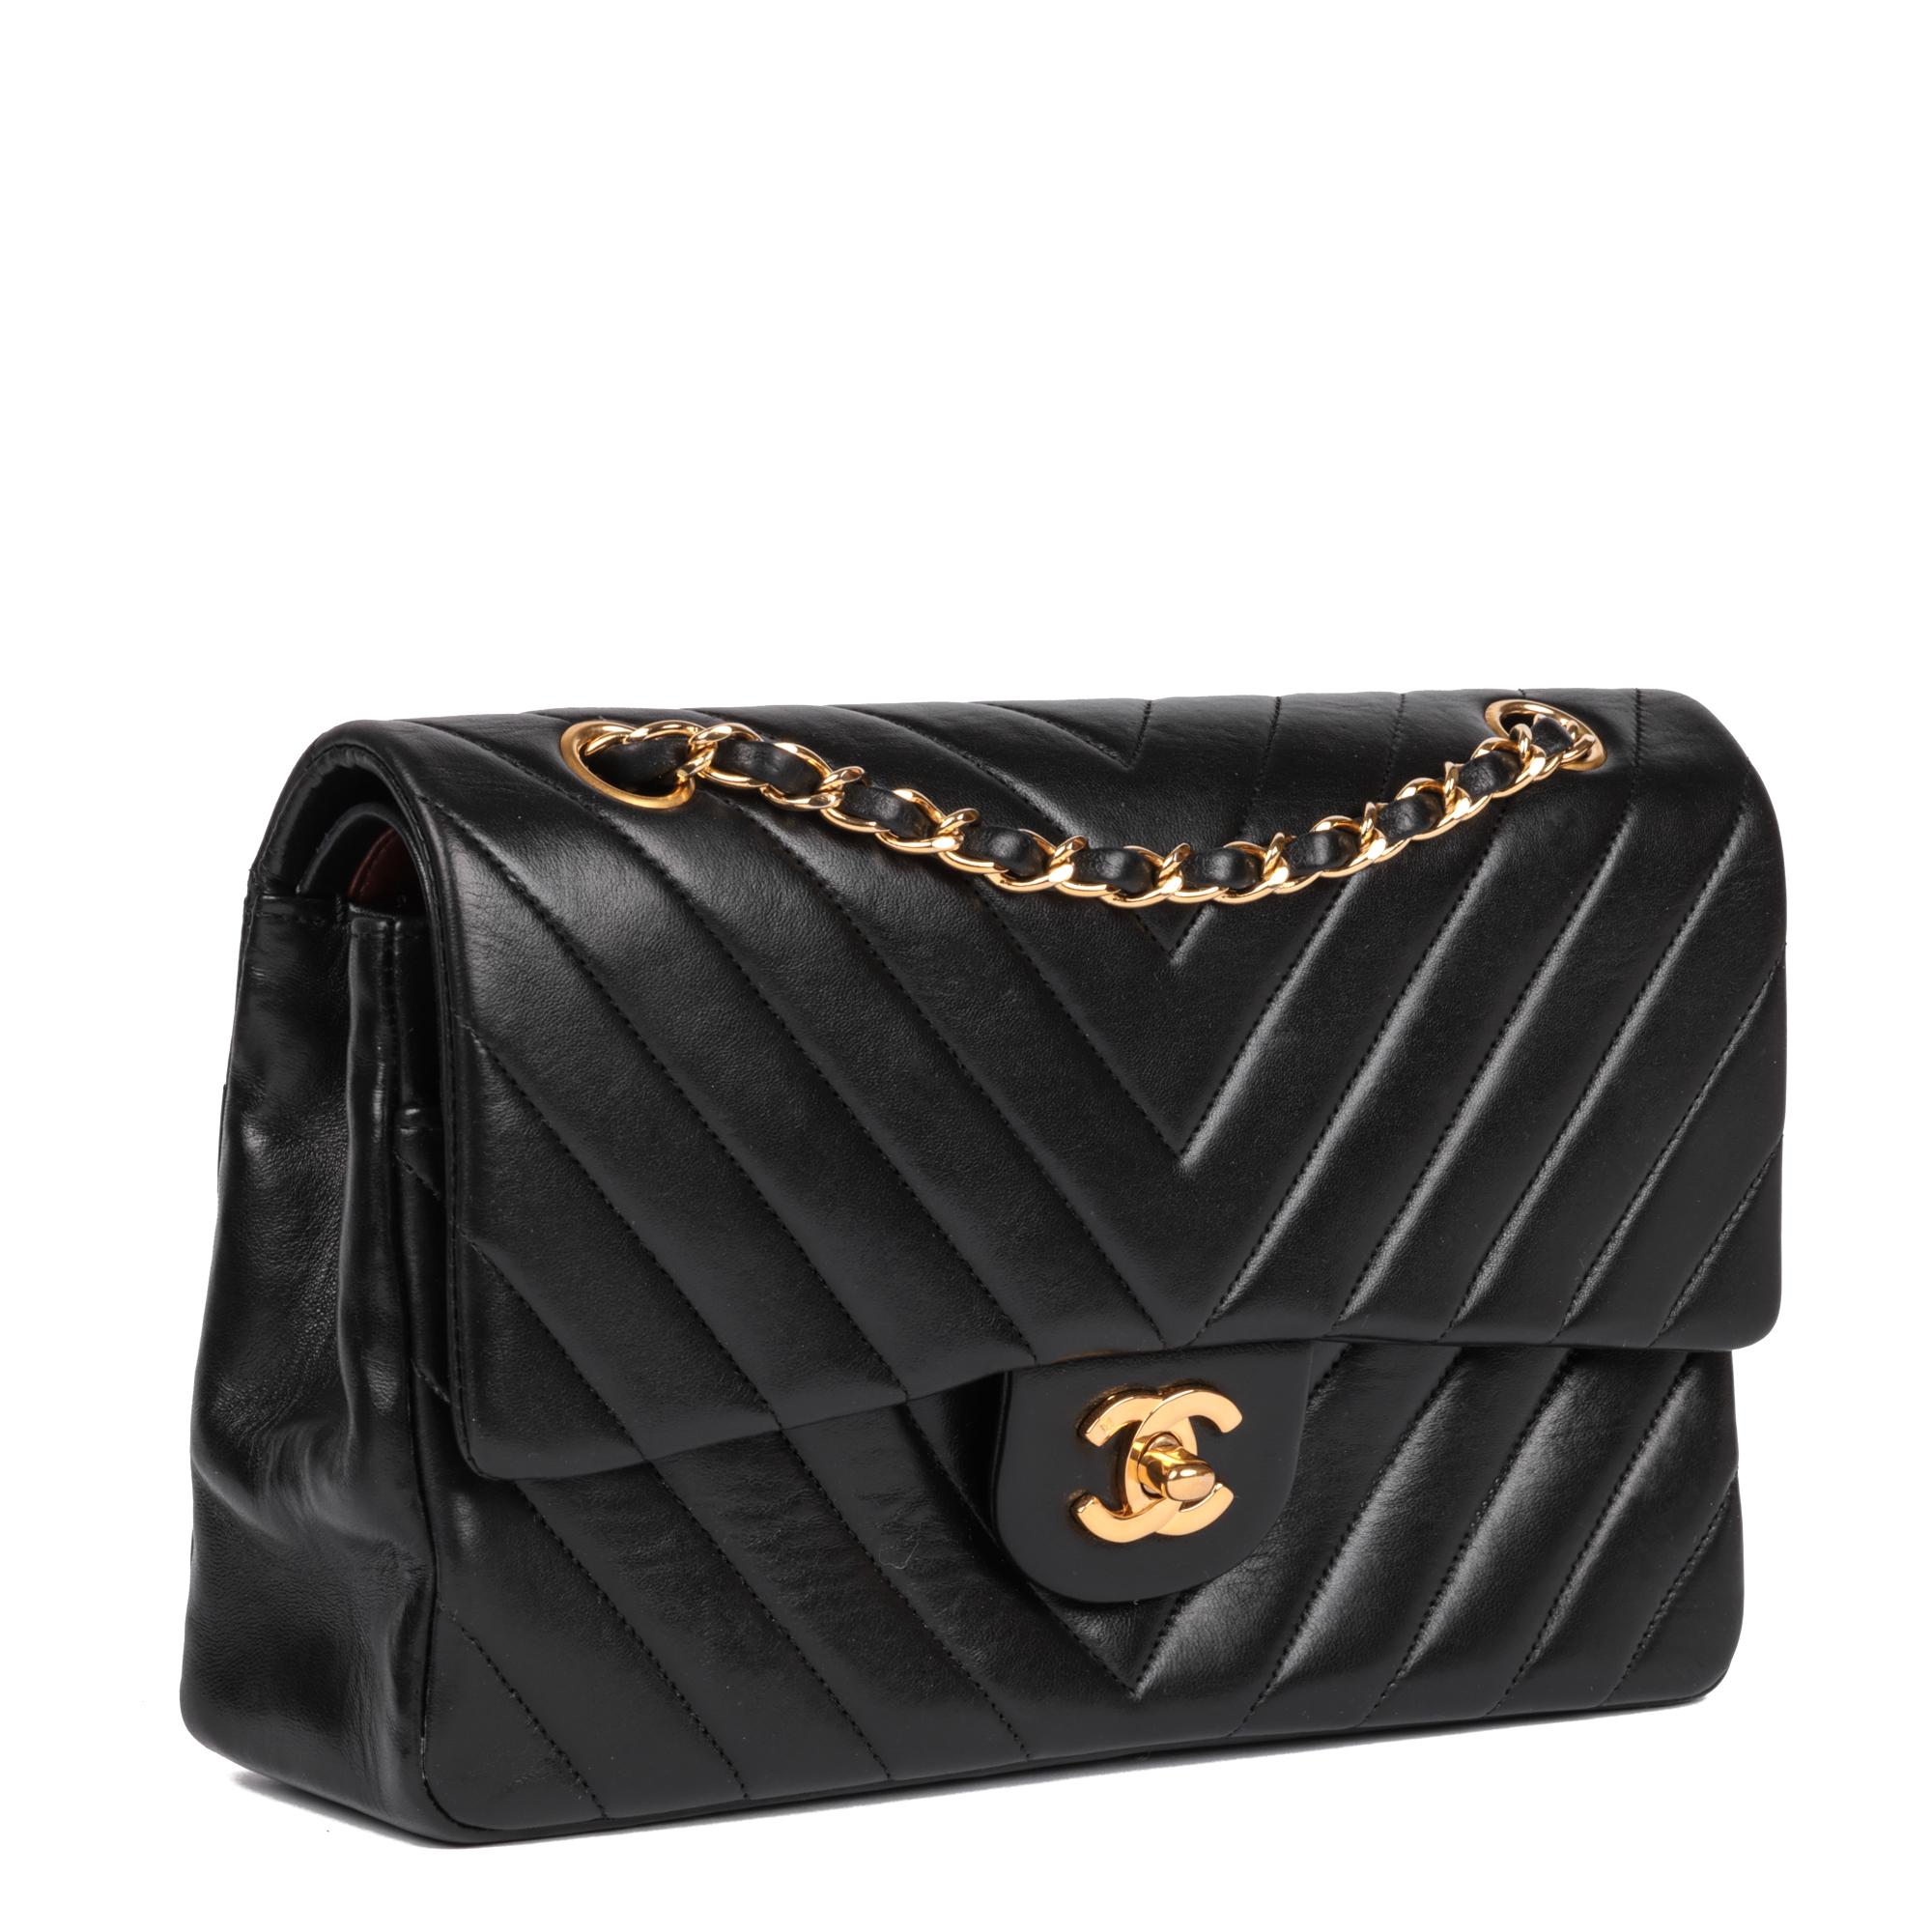 CHANEL
Black Chevron Quilted Lambskin Vintage Medium Classic Double Flap Bag

Serial Number: 1904831
Age (Circa): 1992
Accompanied By: Chanel Dust Bag, Authenticity Card
Authenticity Details: Authenticity Card, Serial Sticker (Made in